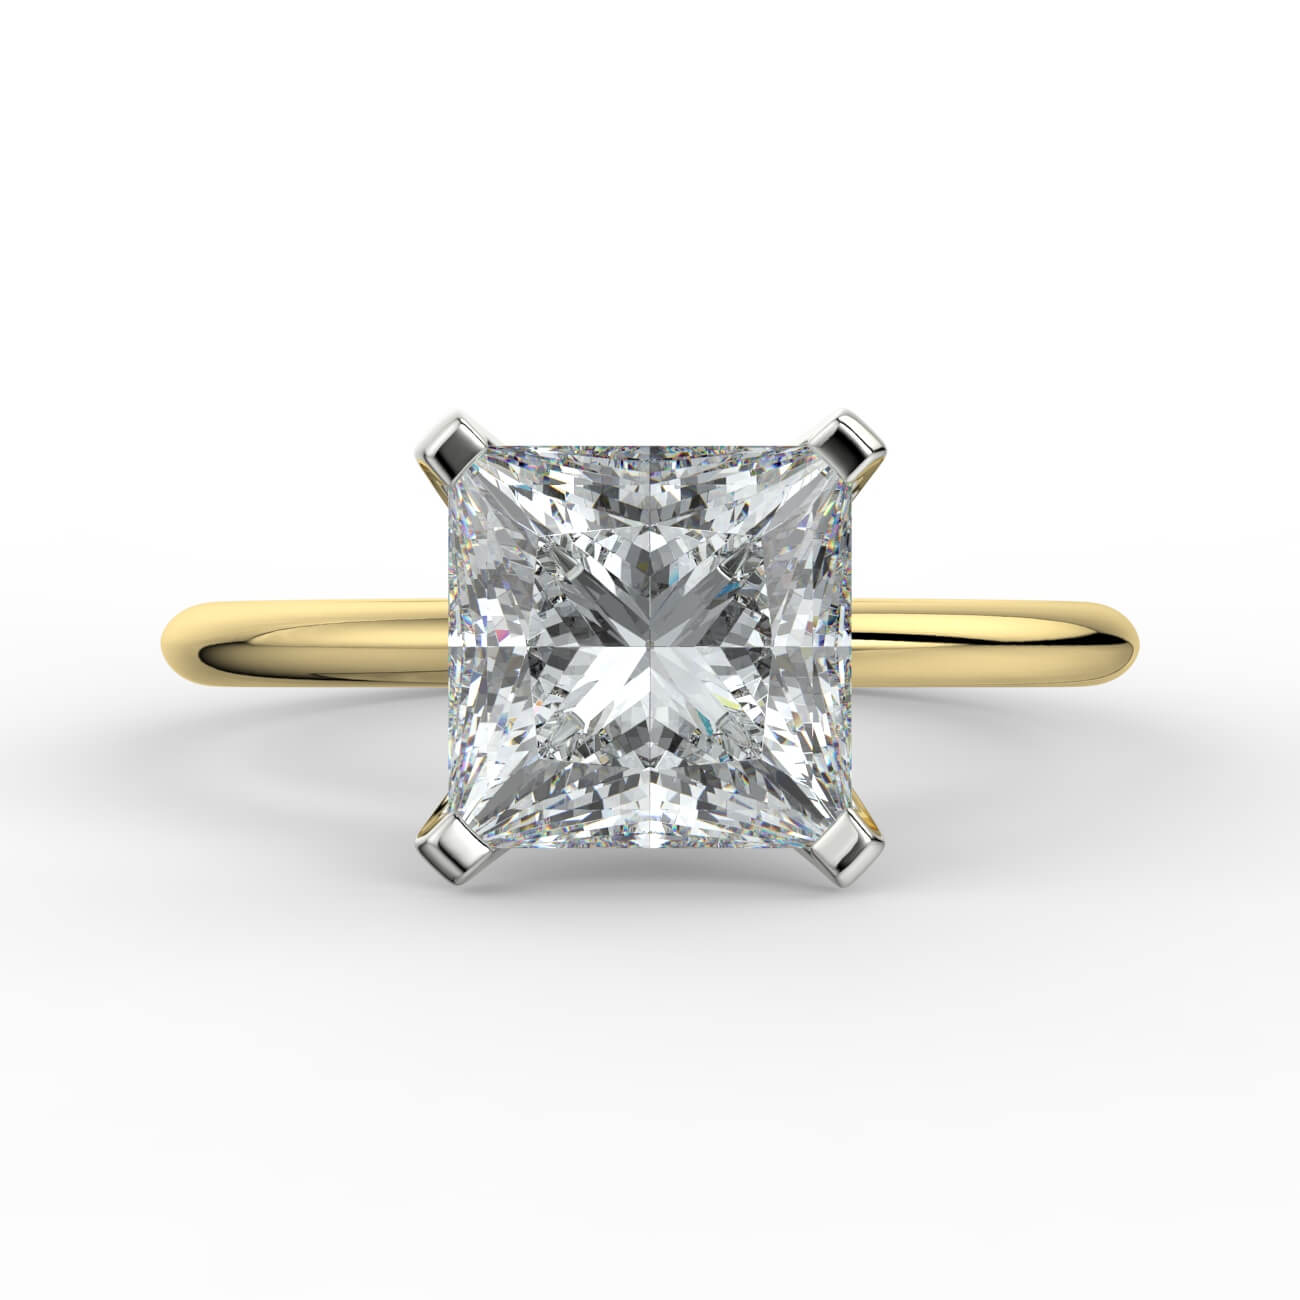 Knife-edge solitaire princess cut diamond engagement ring in white and yellow gold – Australian Diamond Network